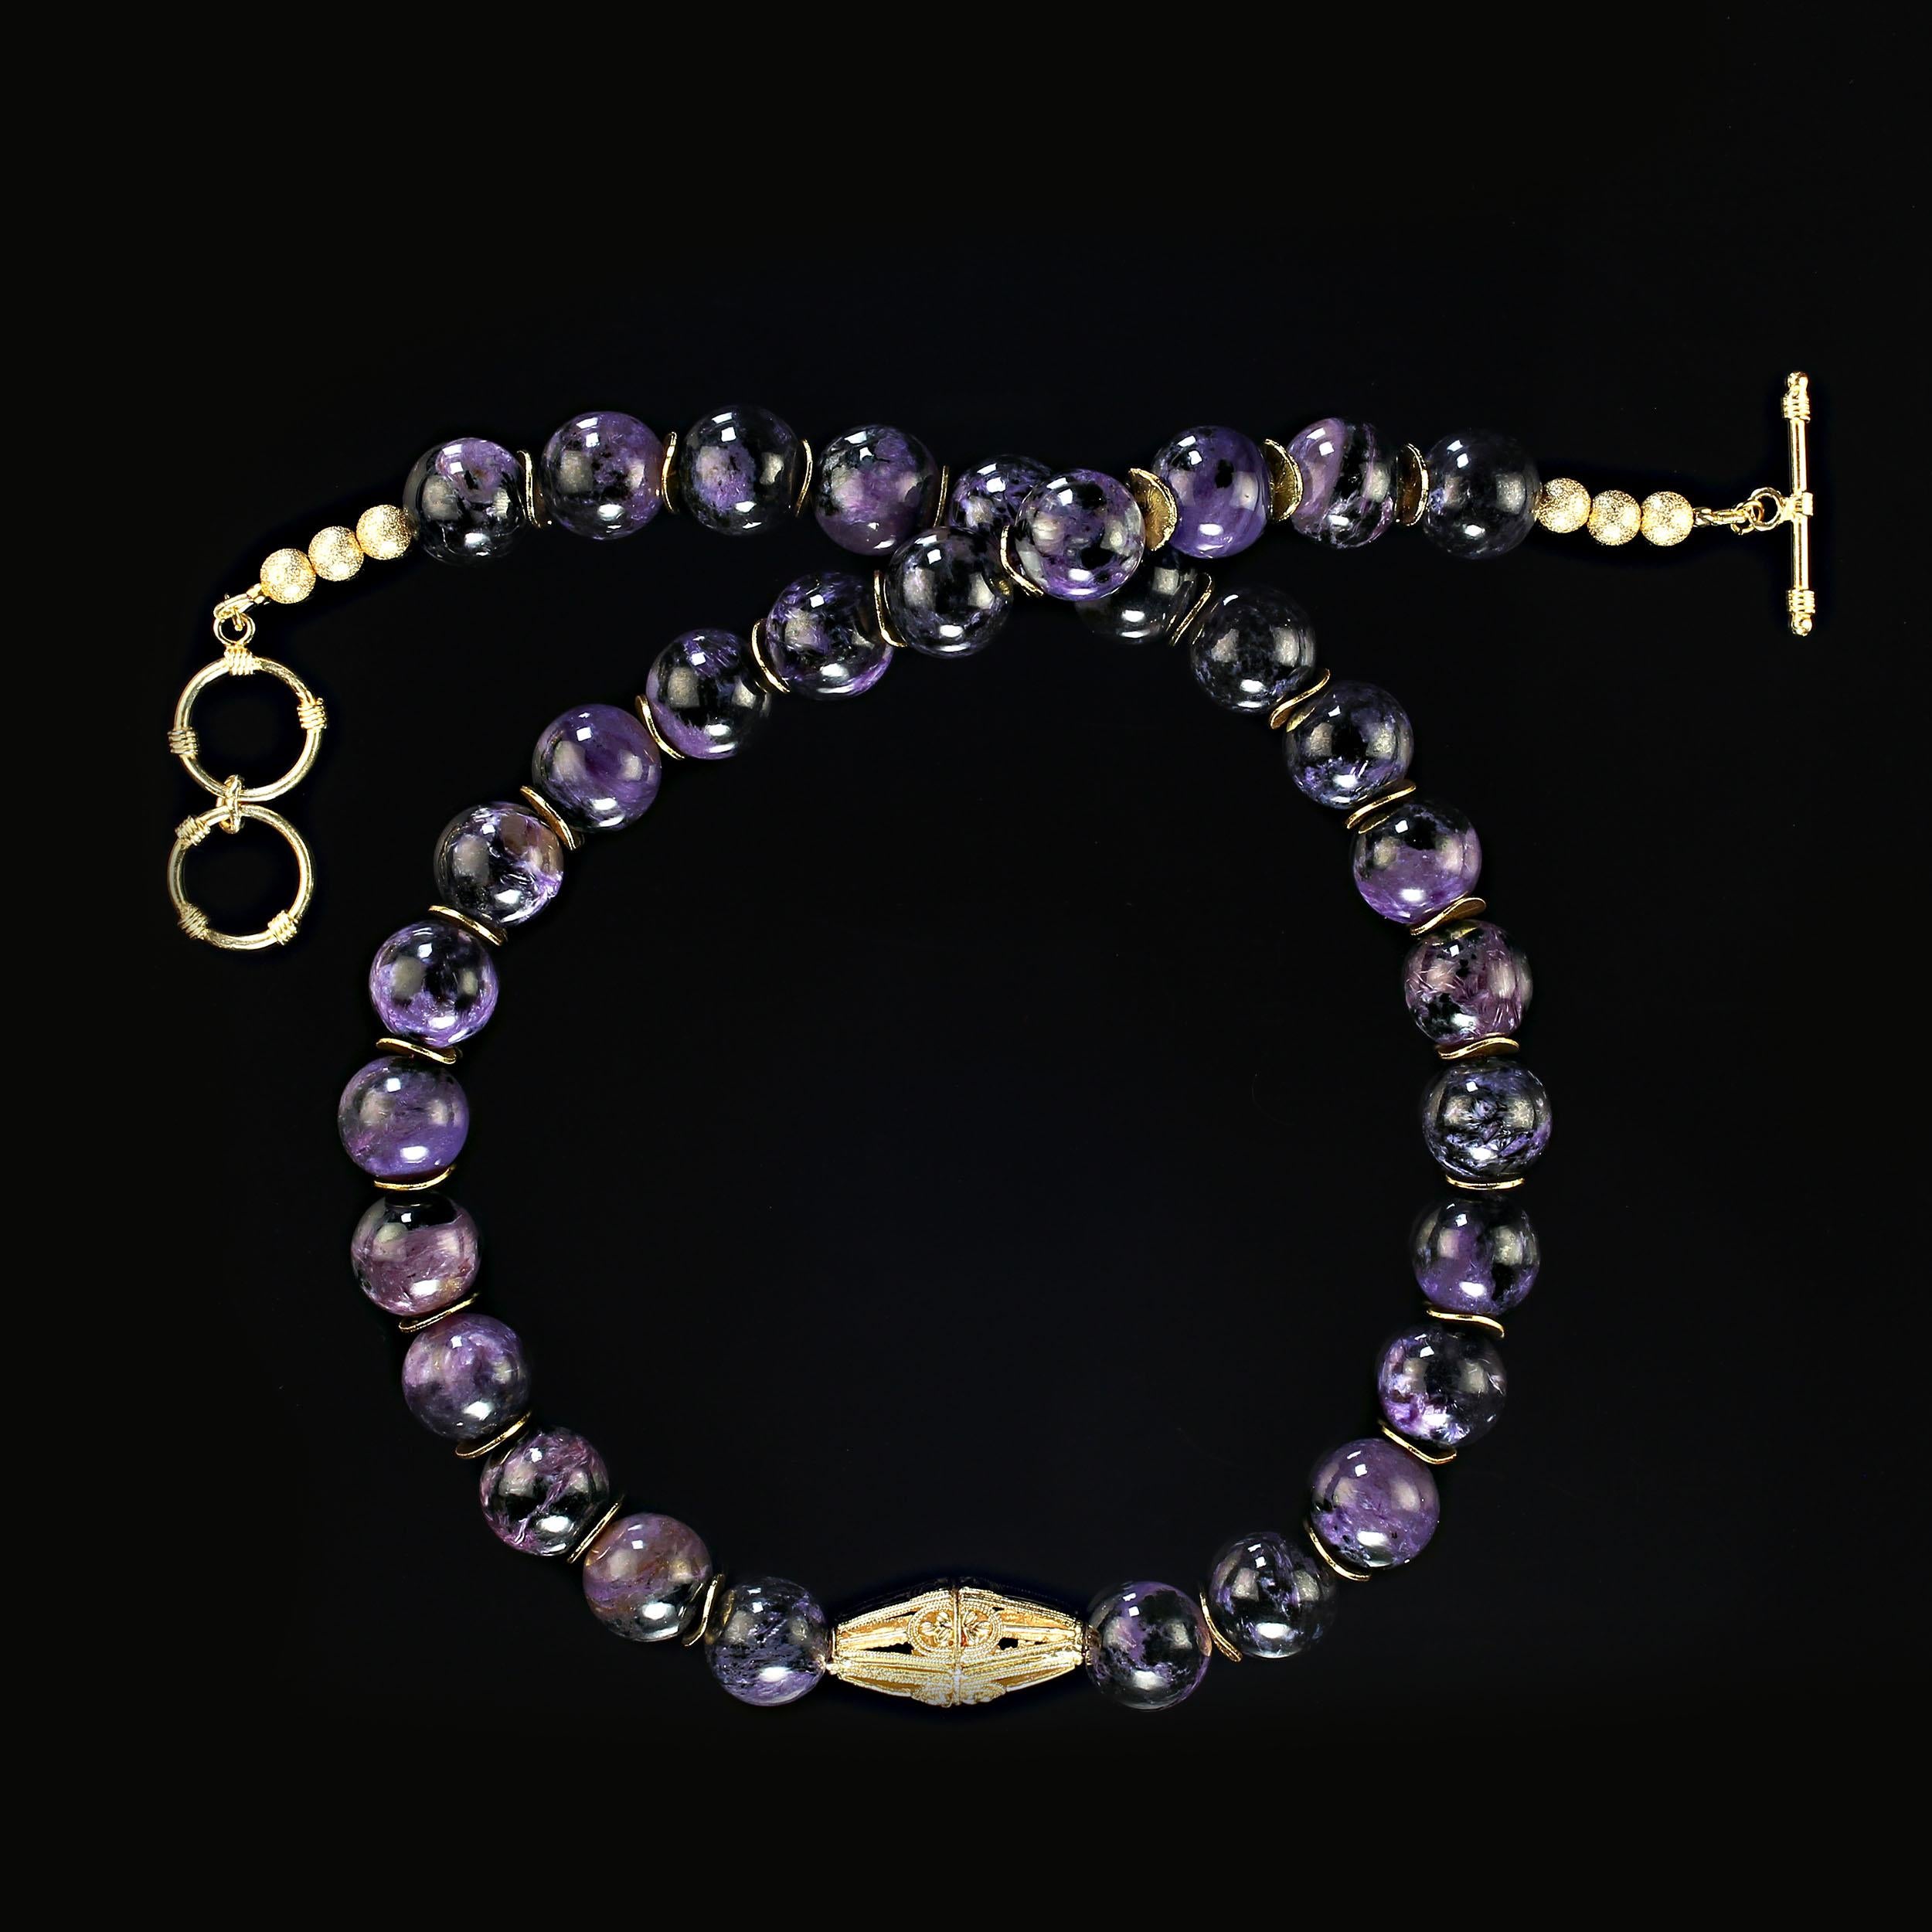 22 Inch glowing charoite in large 14 mm beads with an elegant gold tone focal and gold tone flutters accents the purple charoite beads.  The black matrix mixed with the purple enhances each unique bead.  This necklace is secured with a gold plated 2